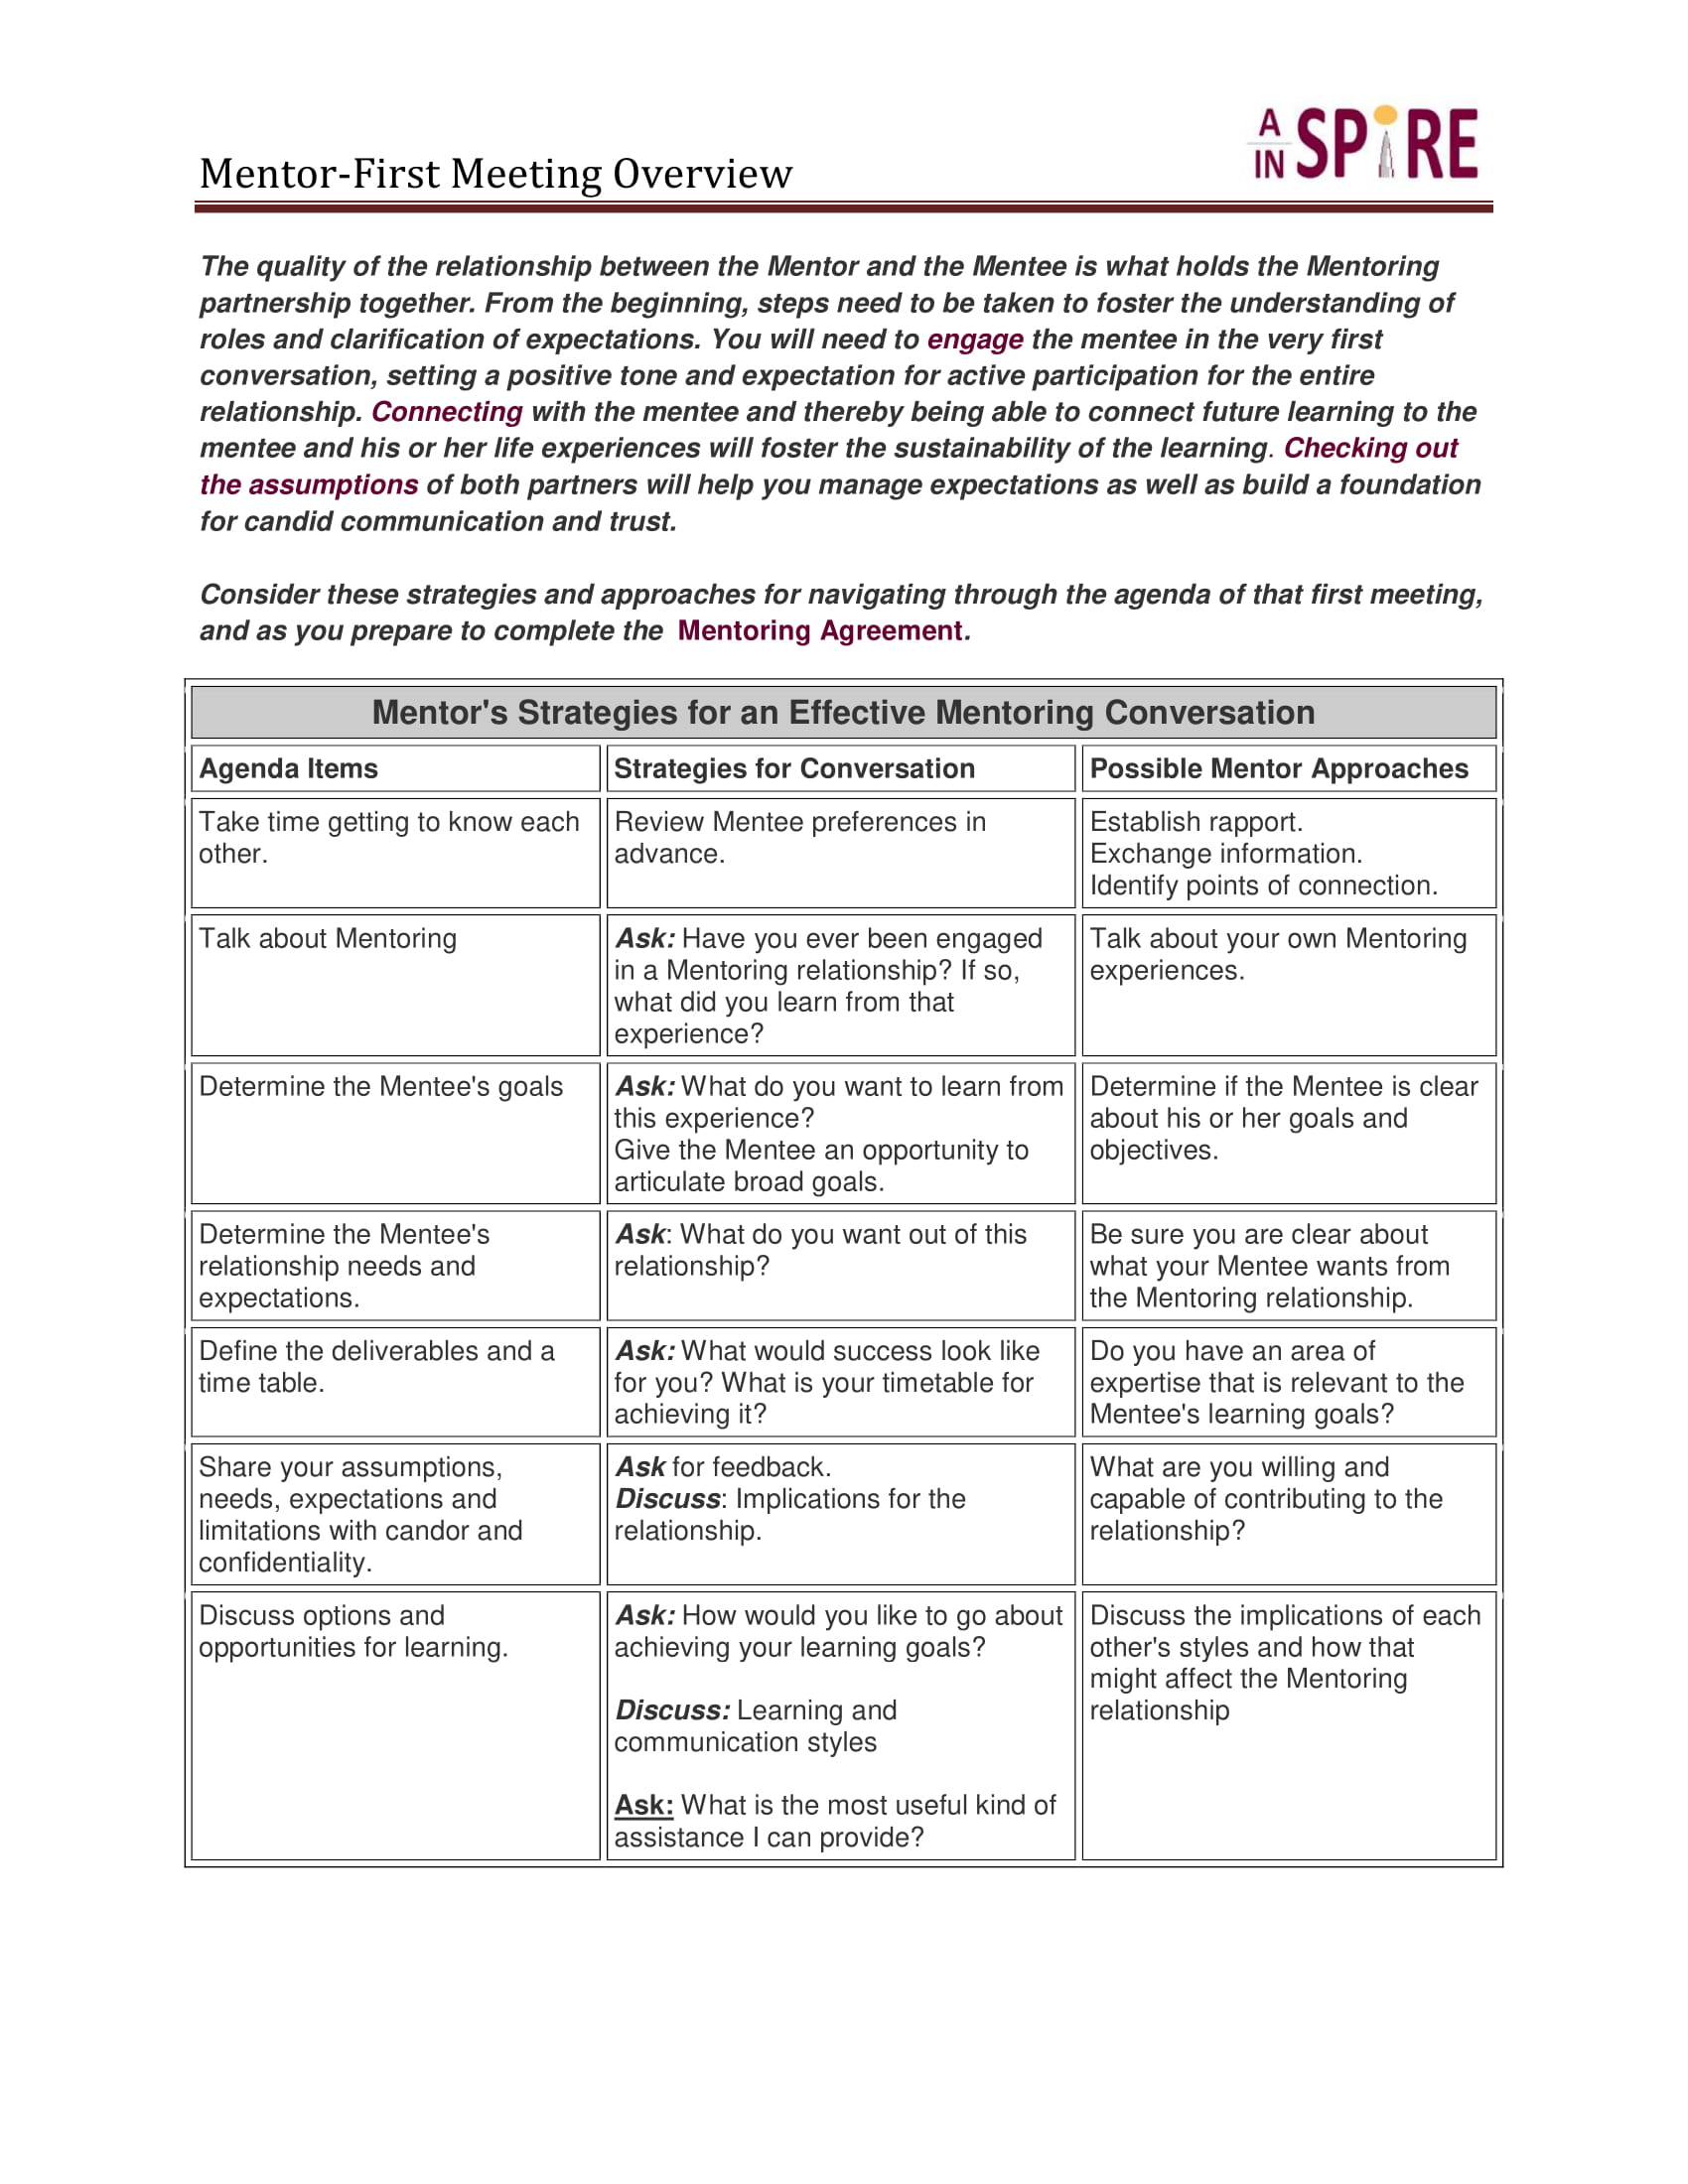 29+ Mentoring Action Plan Examples - PDF  Examples